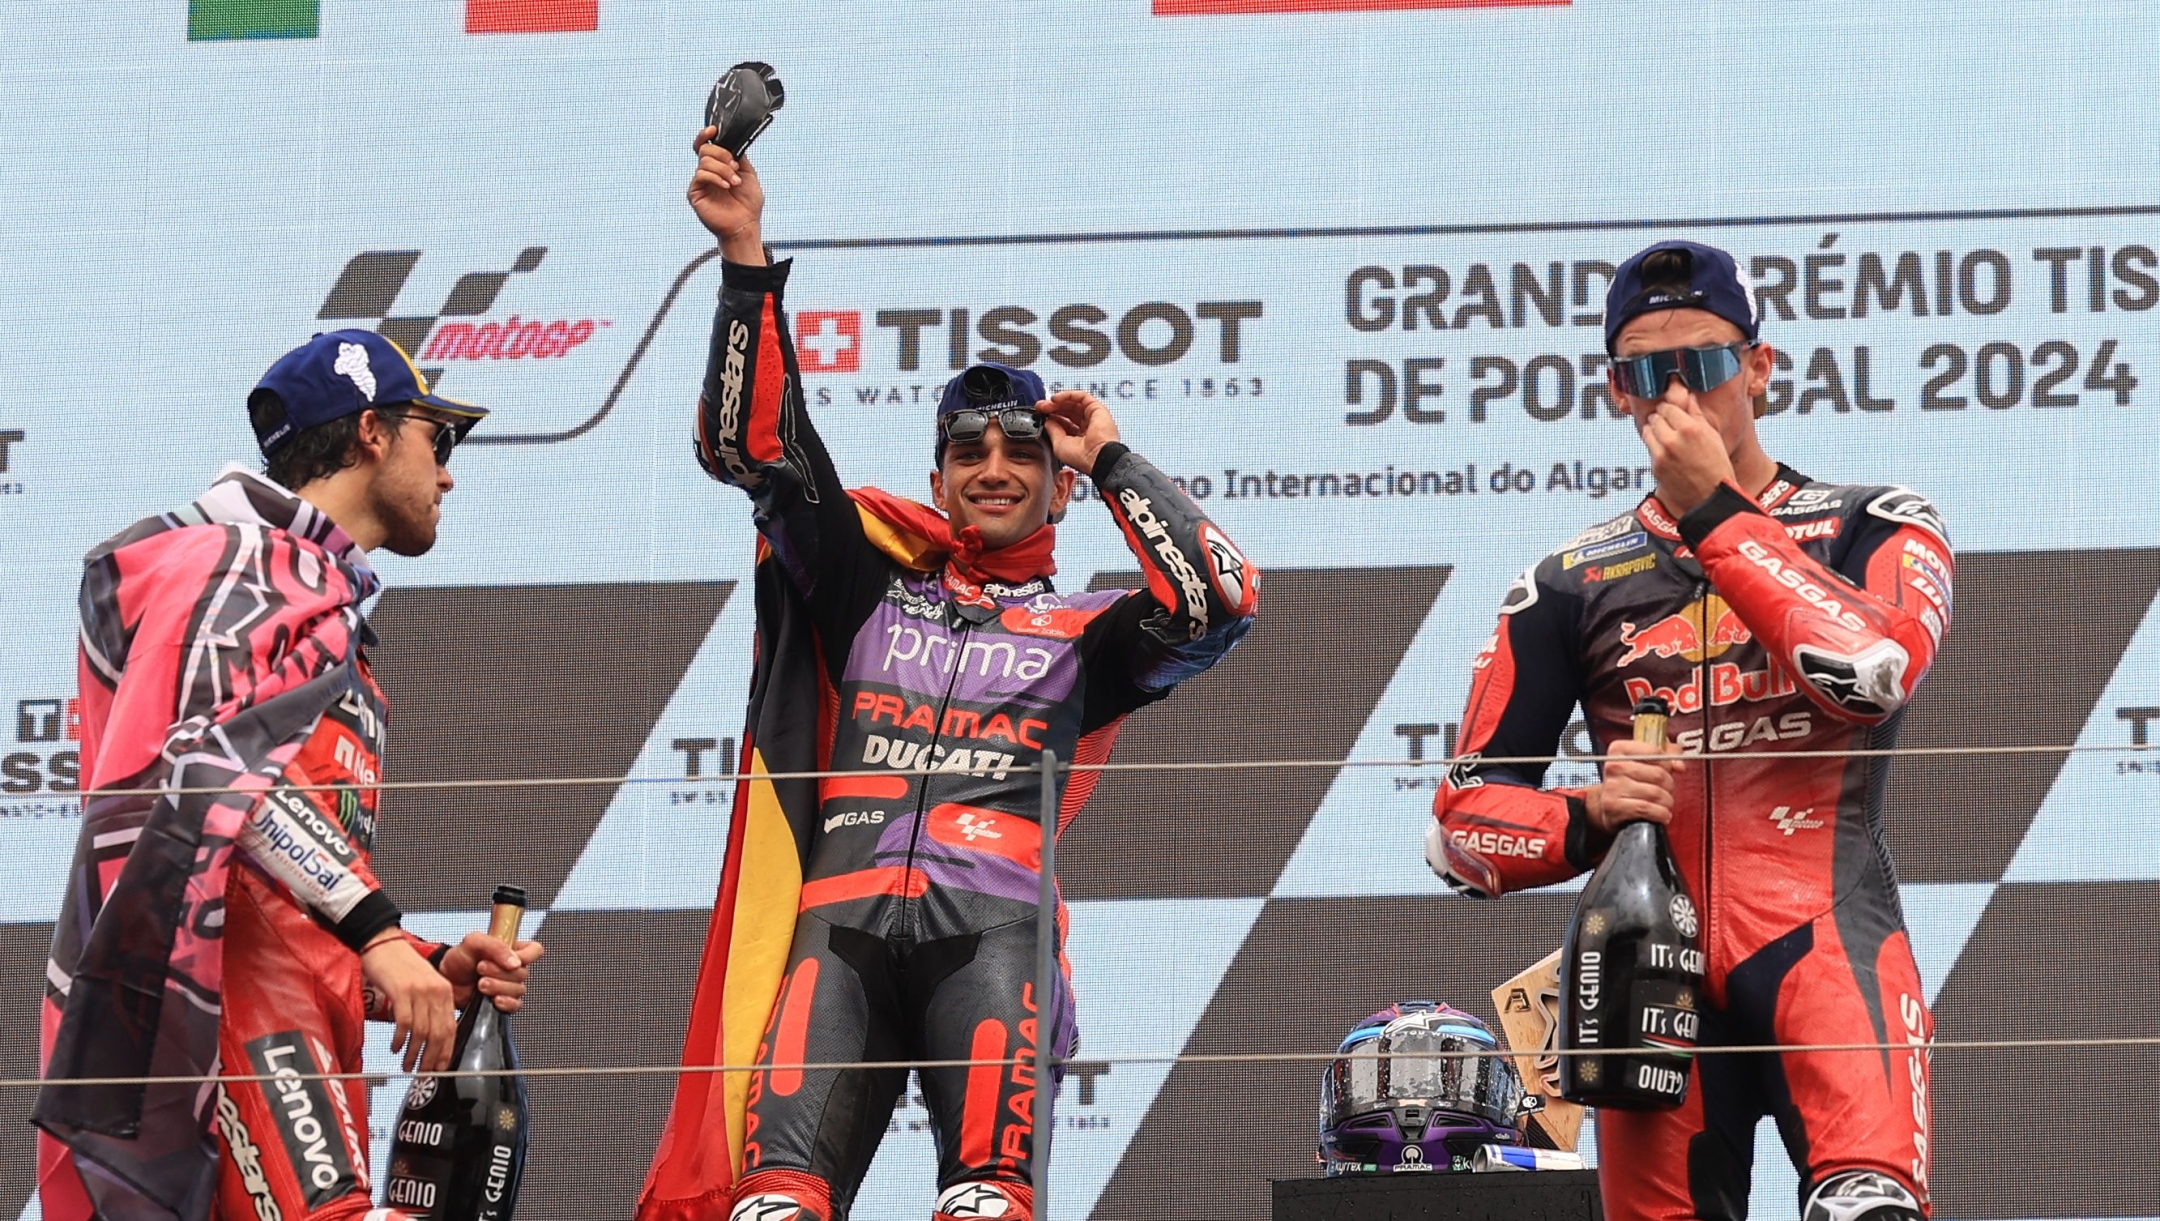 Ducati Spanish rider Jorge Martin (C) celebrates on the podium with second placed Ducati Italian rider Enea Bastianini (L) and third placed KTM Spanish rider Pedro Acosta after winning the MotoGP race of the Portuguese Grand Prix at the Algarve International Circuit in Portimao on March 24, 2024. (Photo by PATRICIA DE MELO MOREIRA / AFP)